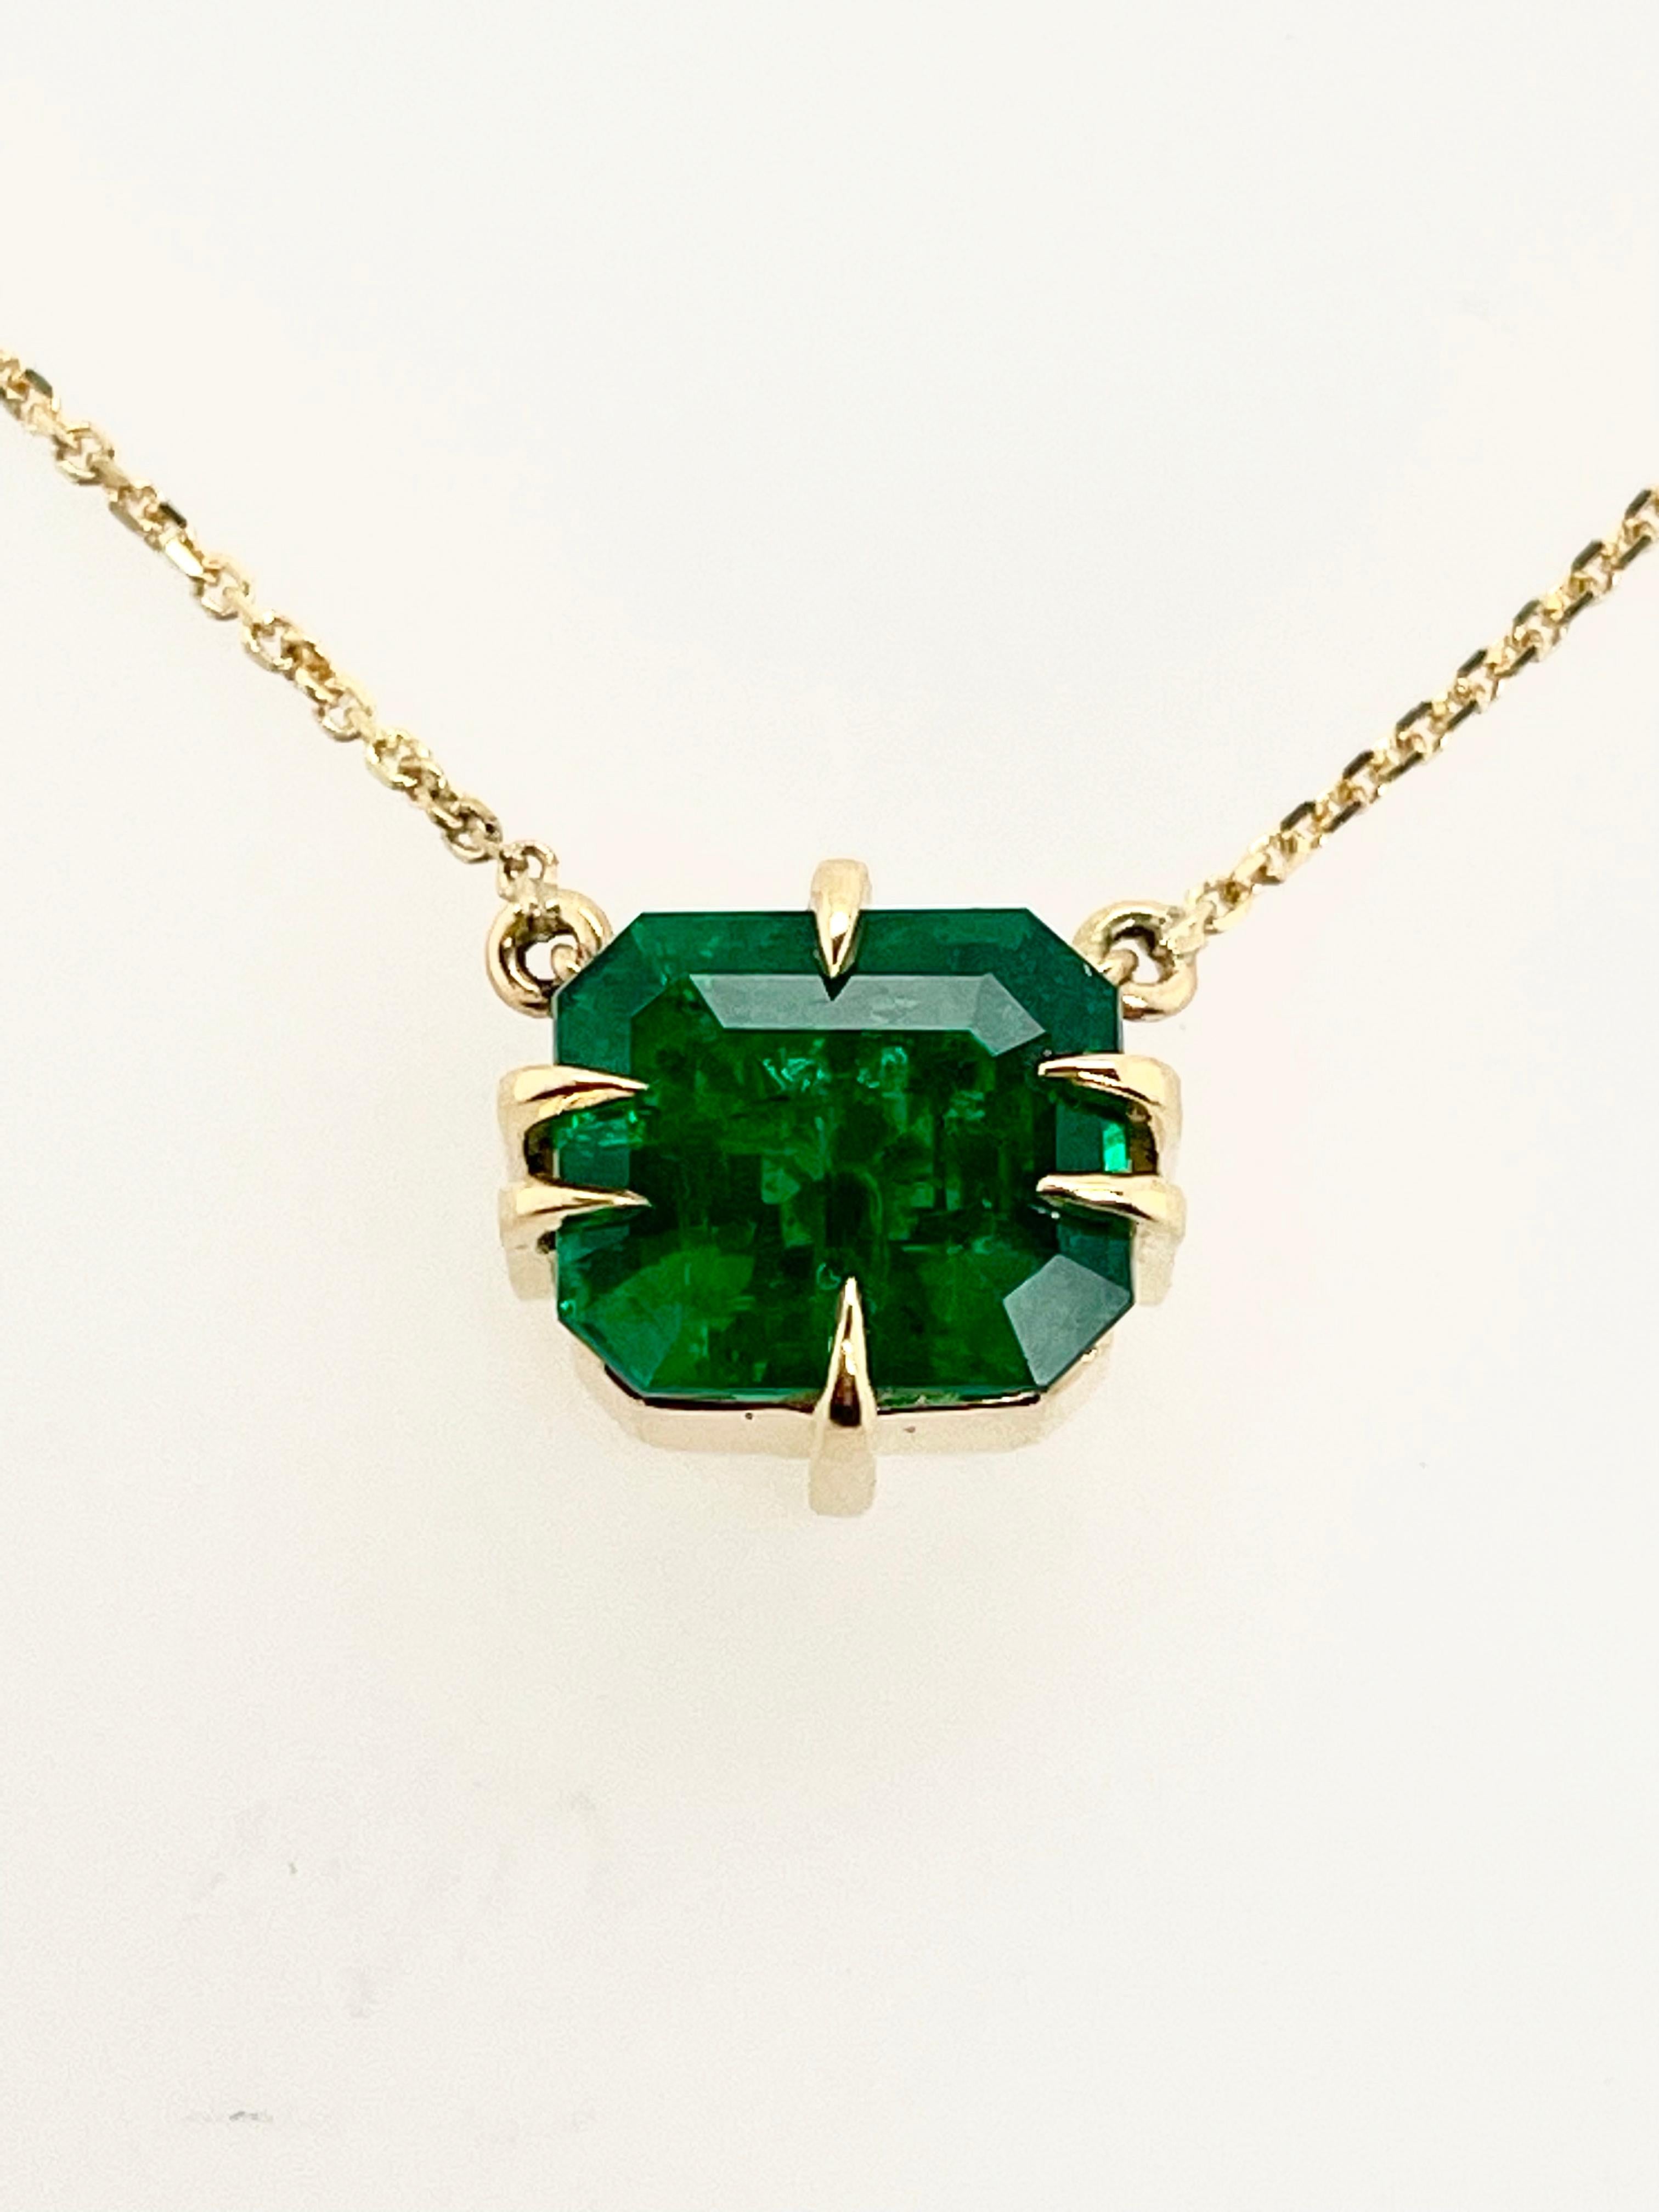 Artisan 2.26ct Emerald necklace made in 18k yellow gold with chain 